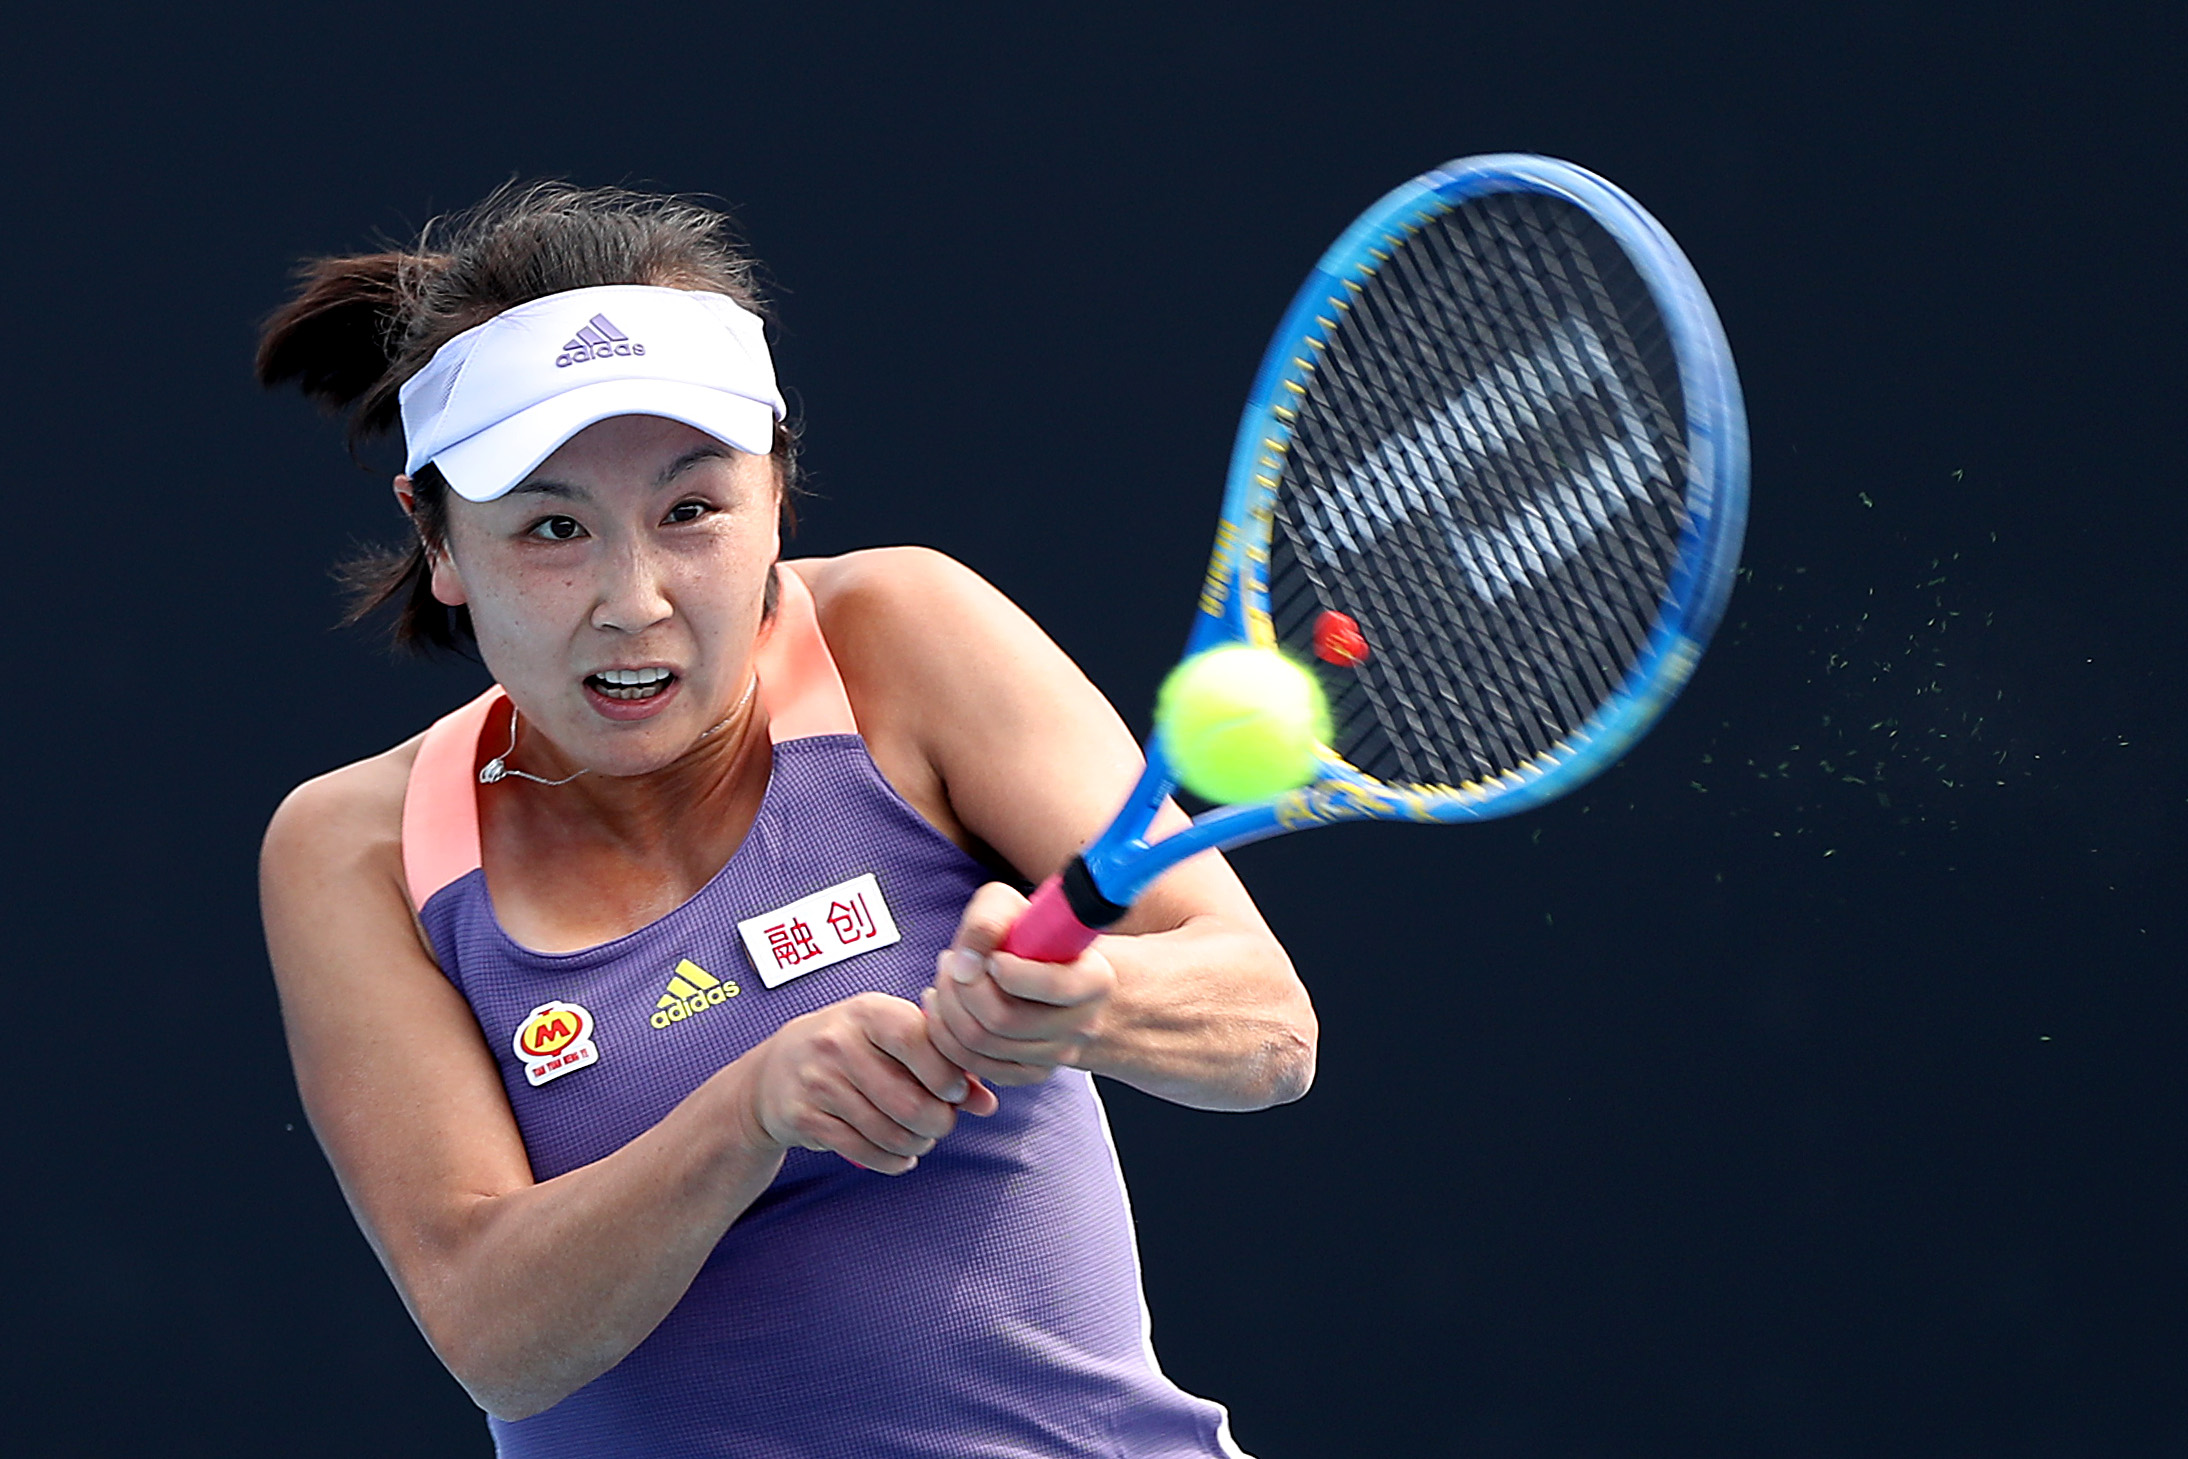 MELBOURNE, AUSTRALIA - JANUARY 21: Shuai Peng of China hits a backhand during her Women's Singles first round match against Nao Hibino of Japan on day two of the 2020 Australian Open at Melbourne Park on January 21, 2020 in Melbourne, Australia. (Photo by Mark Kolbe/Getty Images)